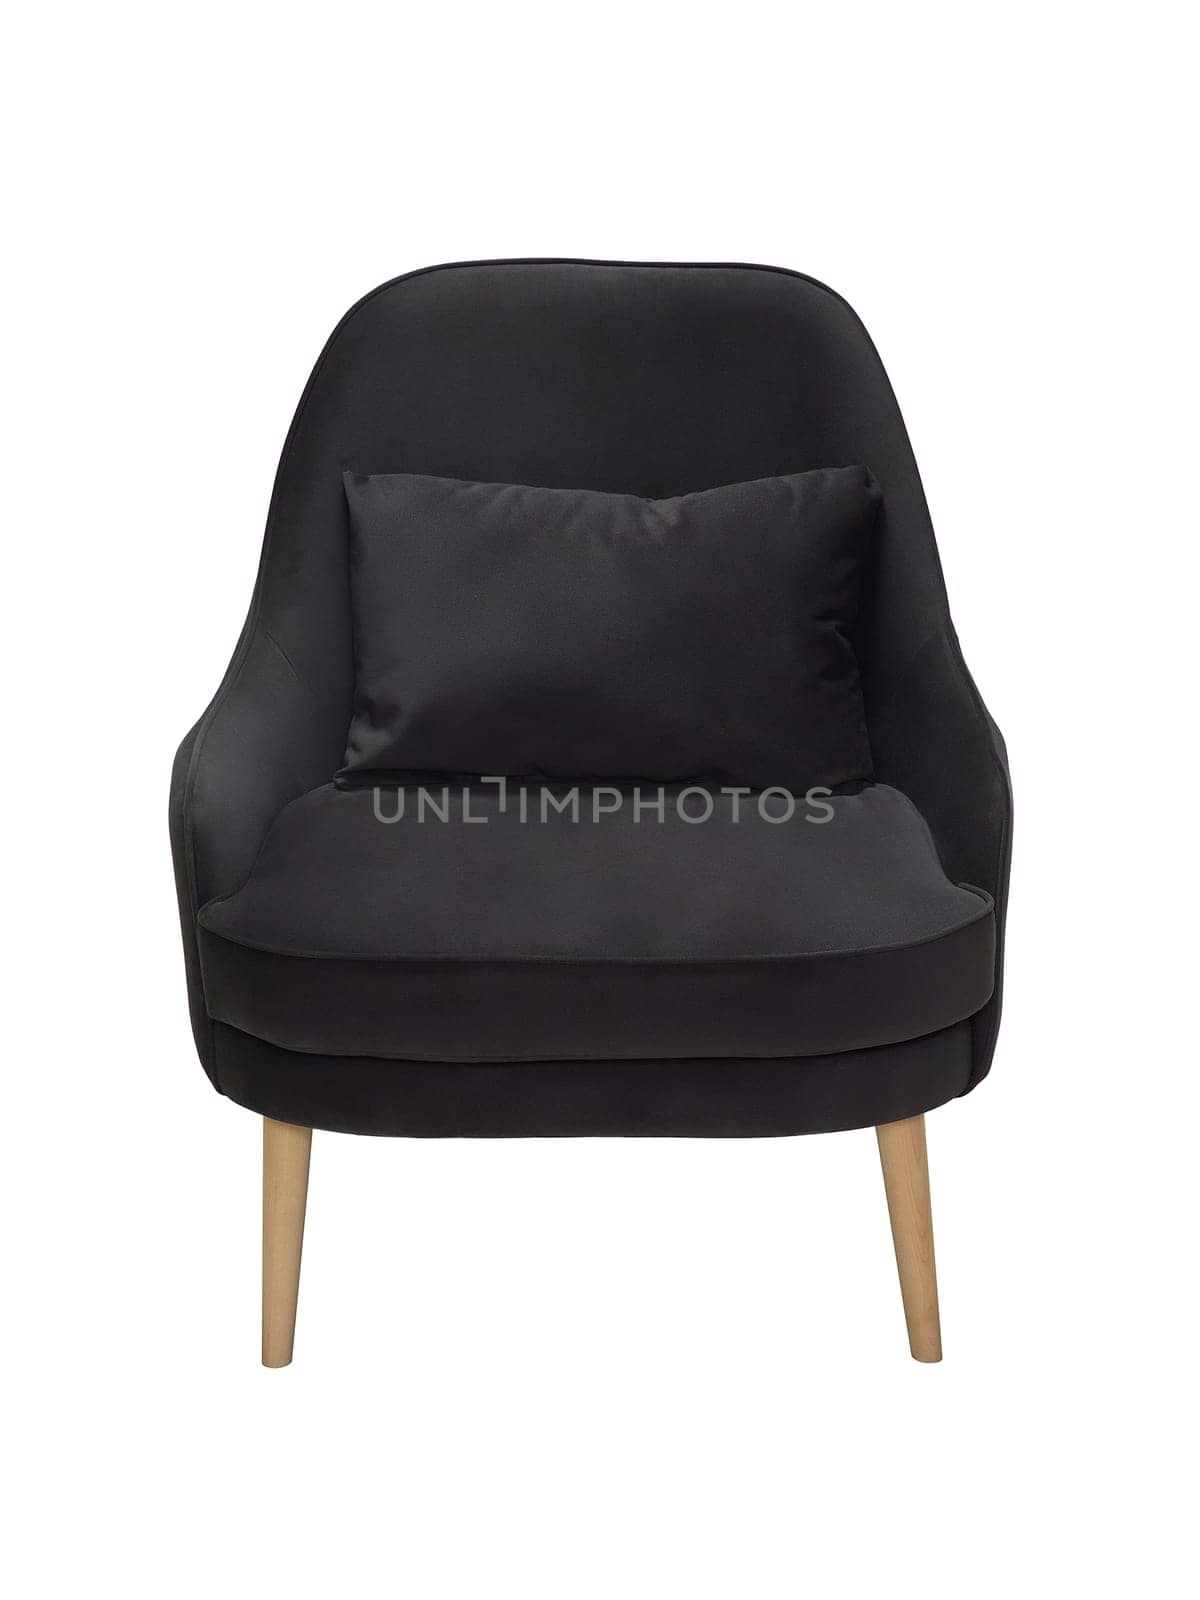 modern black fabric armchair with wooden legs isolated on white background, front view.